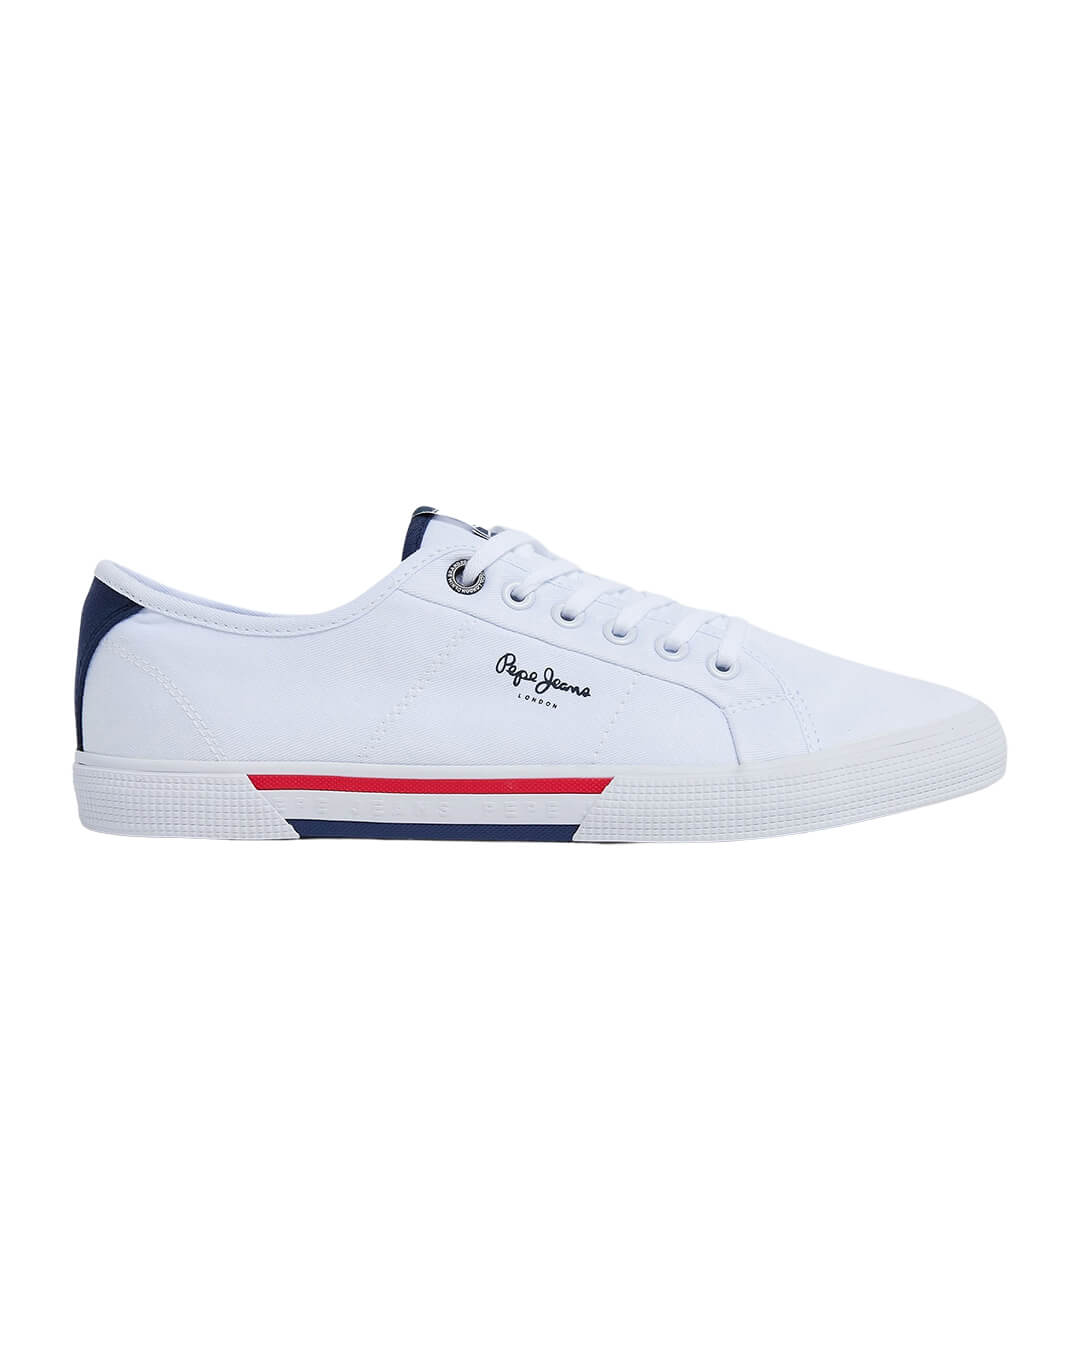 Pepe Jeans Shoes Pepe Jeans White Basic Cotton Trainers